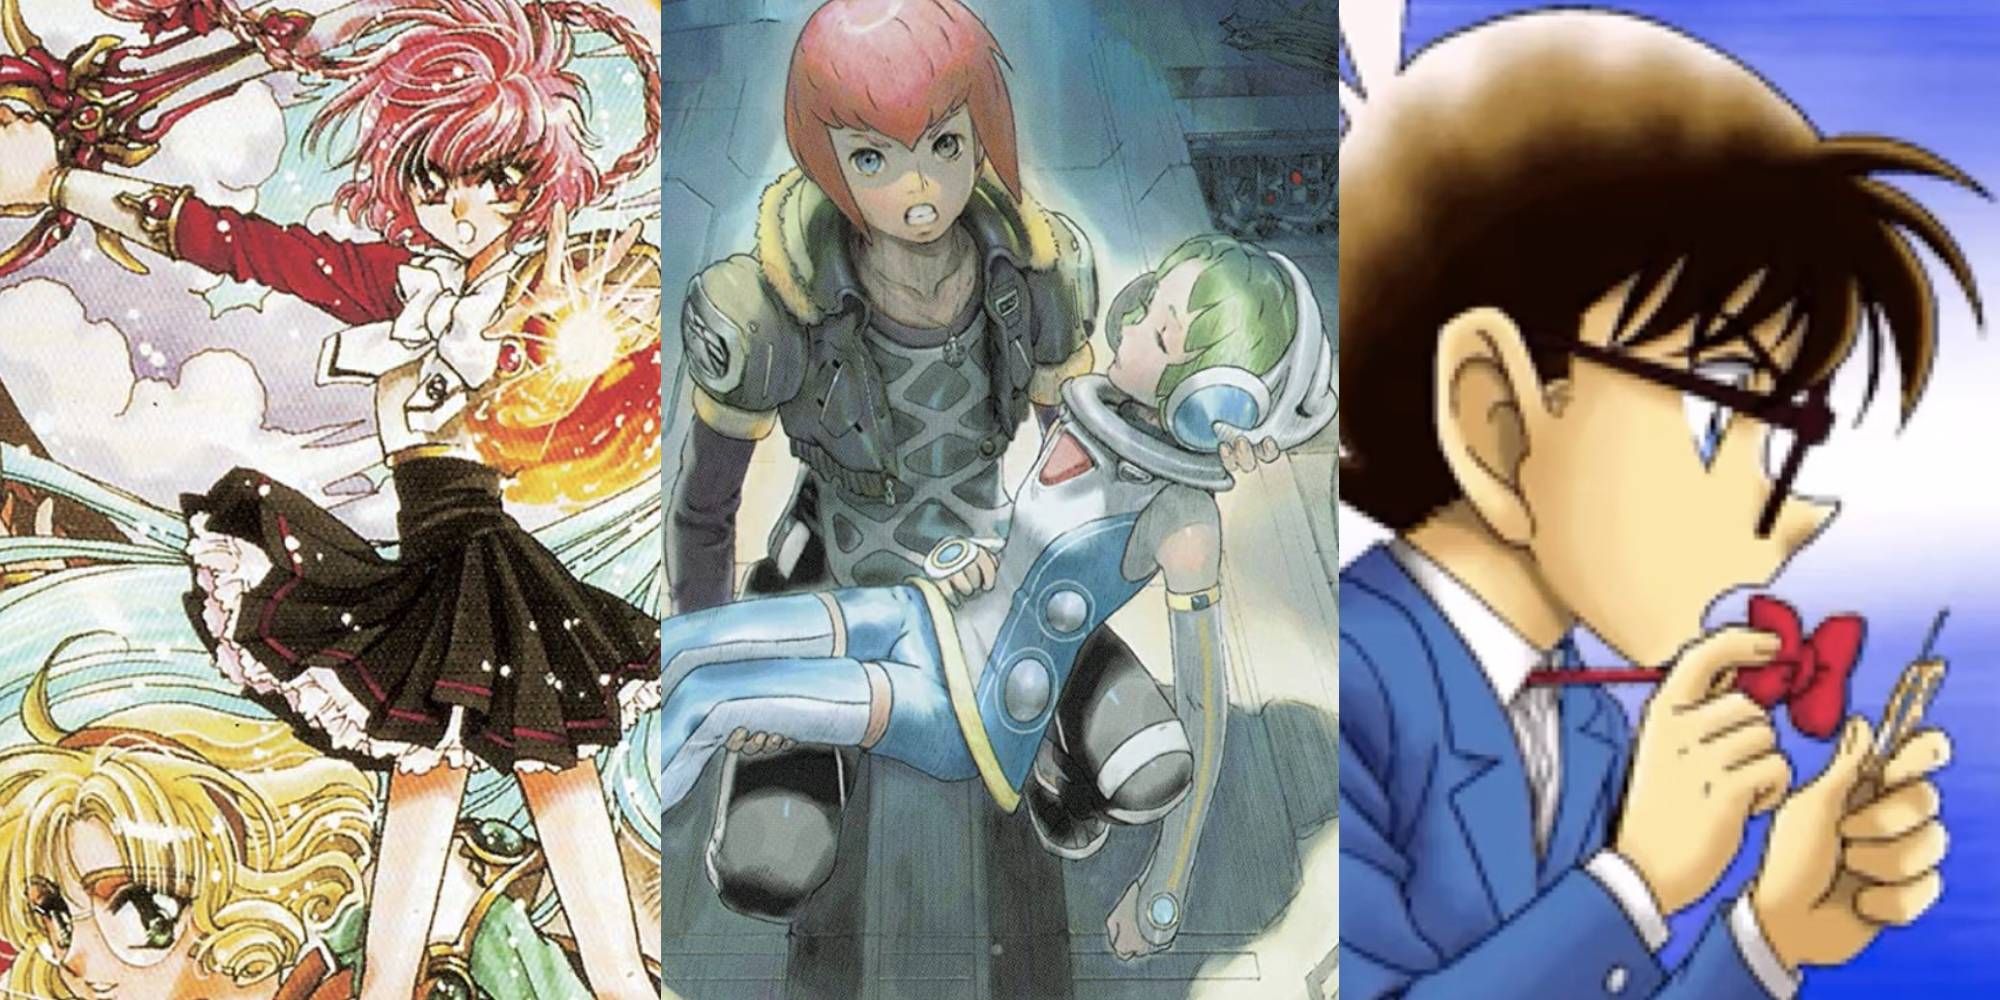 10 Best Games Based On Anime According to Metacritic